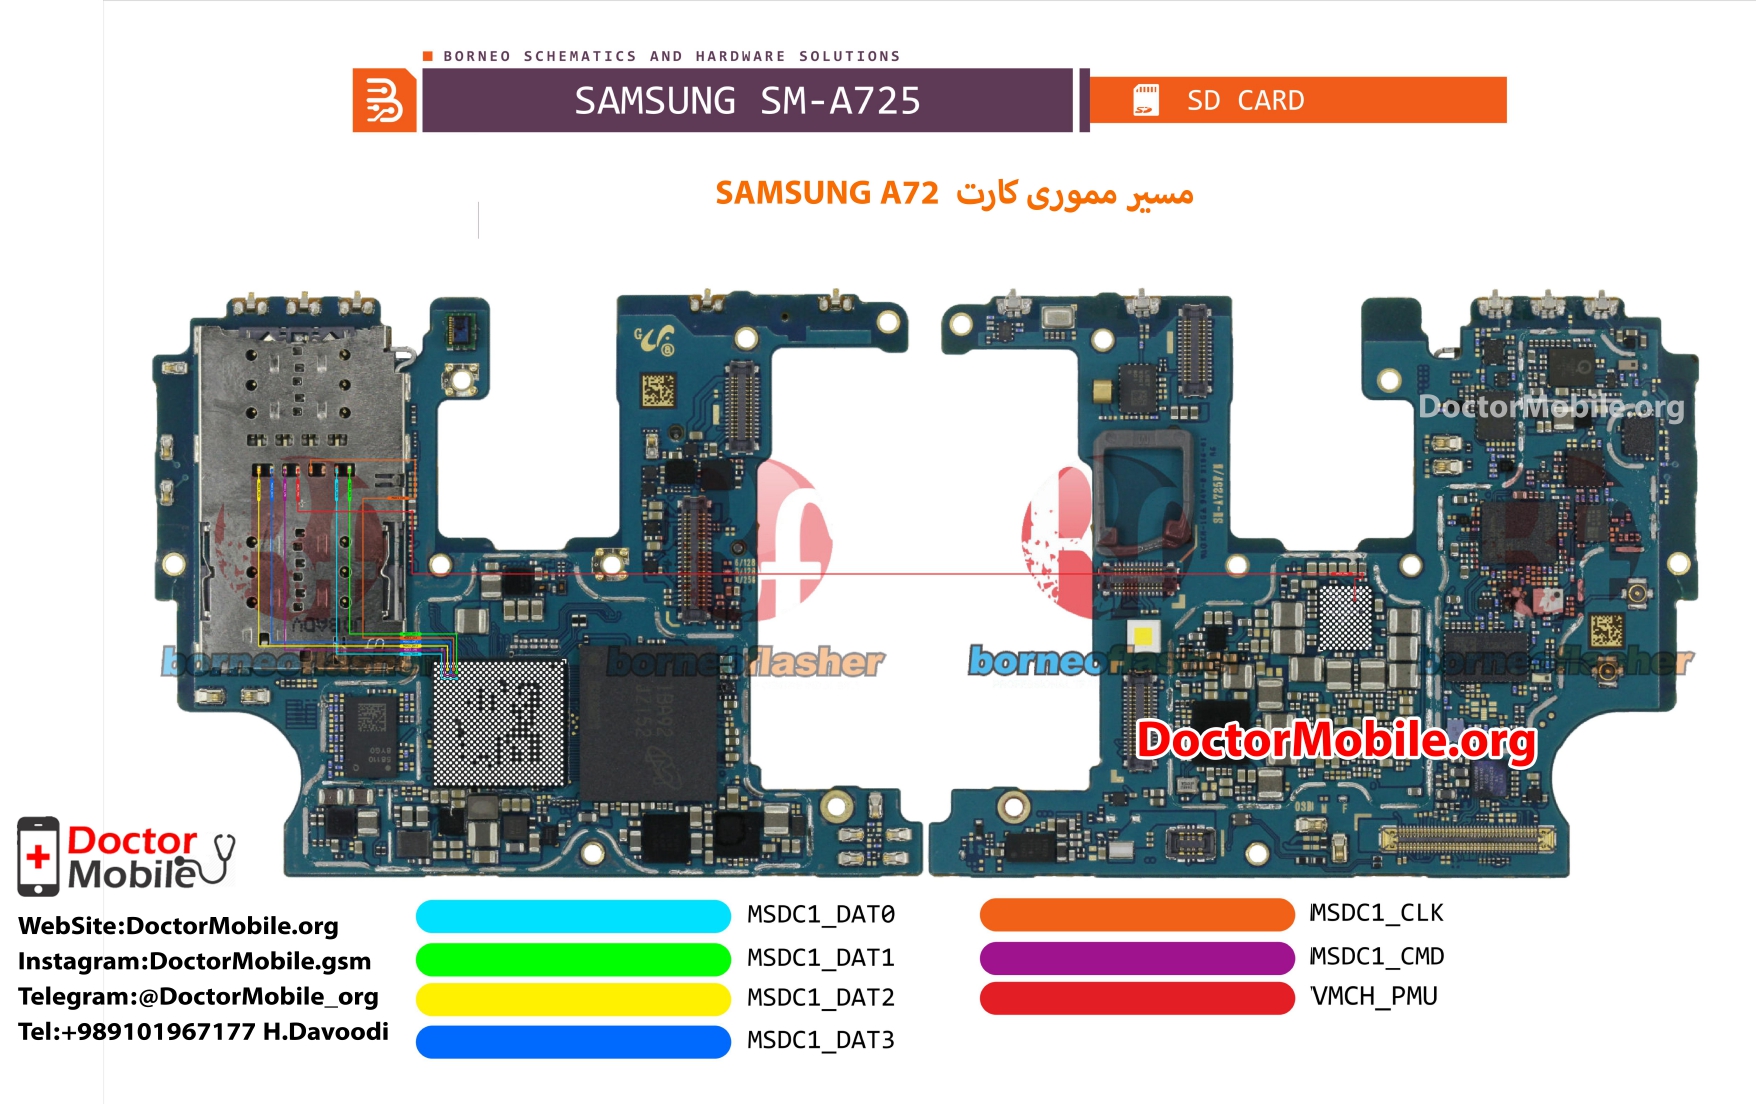 SAMSUNG A725 SD CARD DoctorMobile.org page 0001